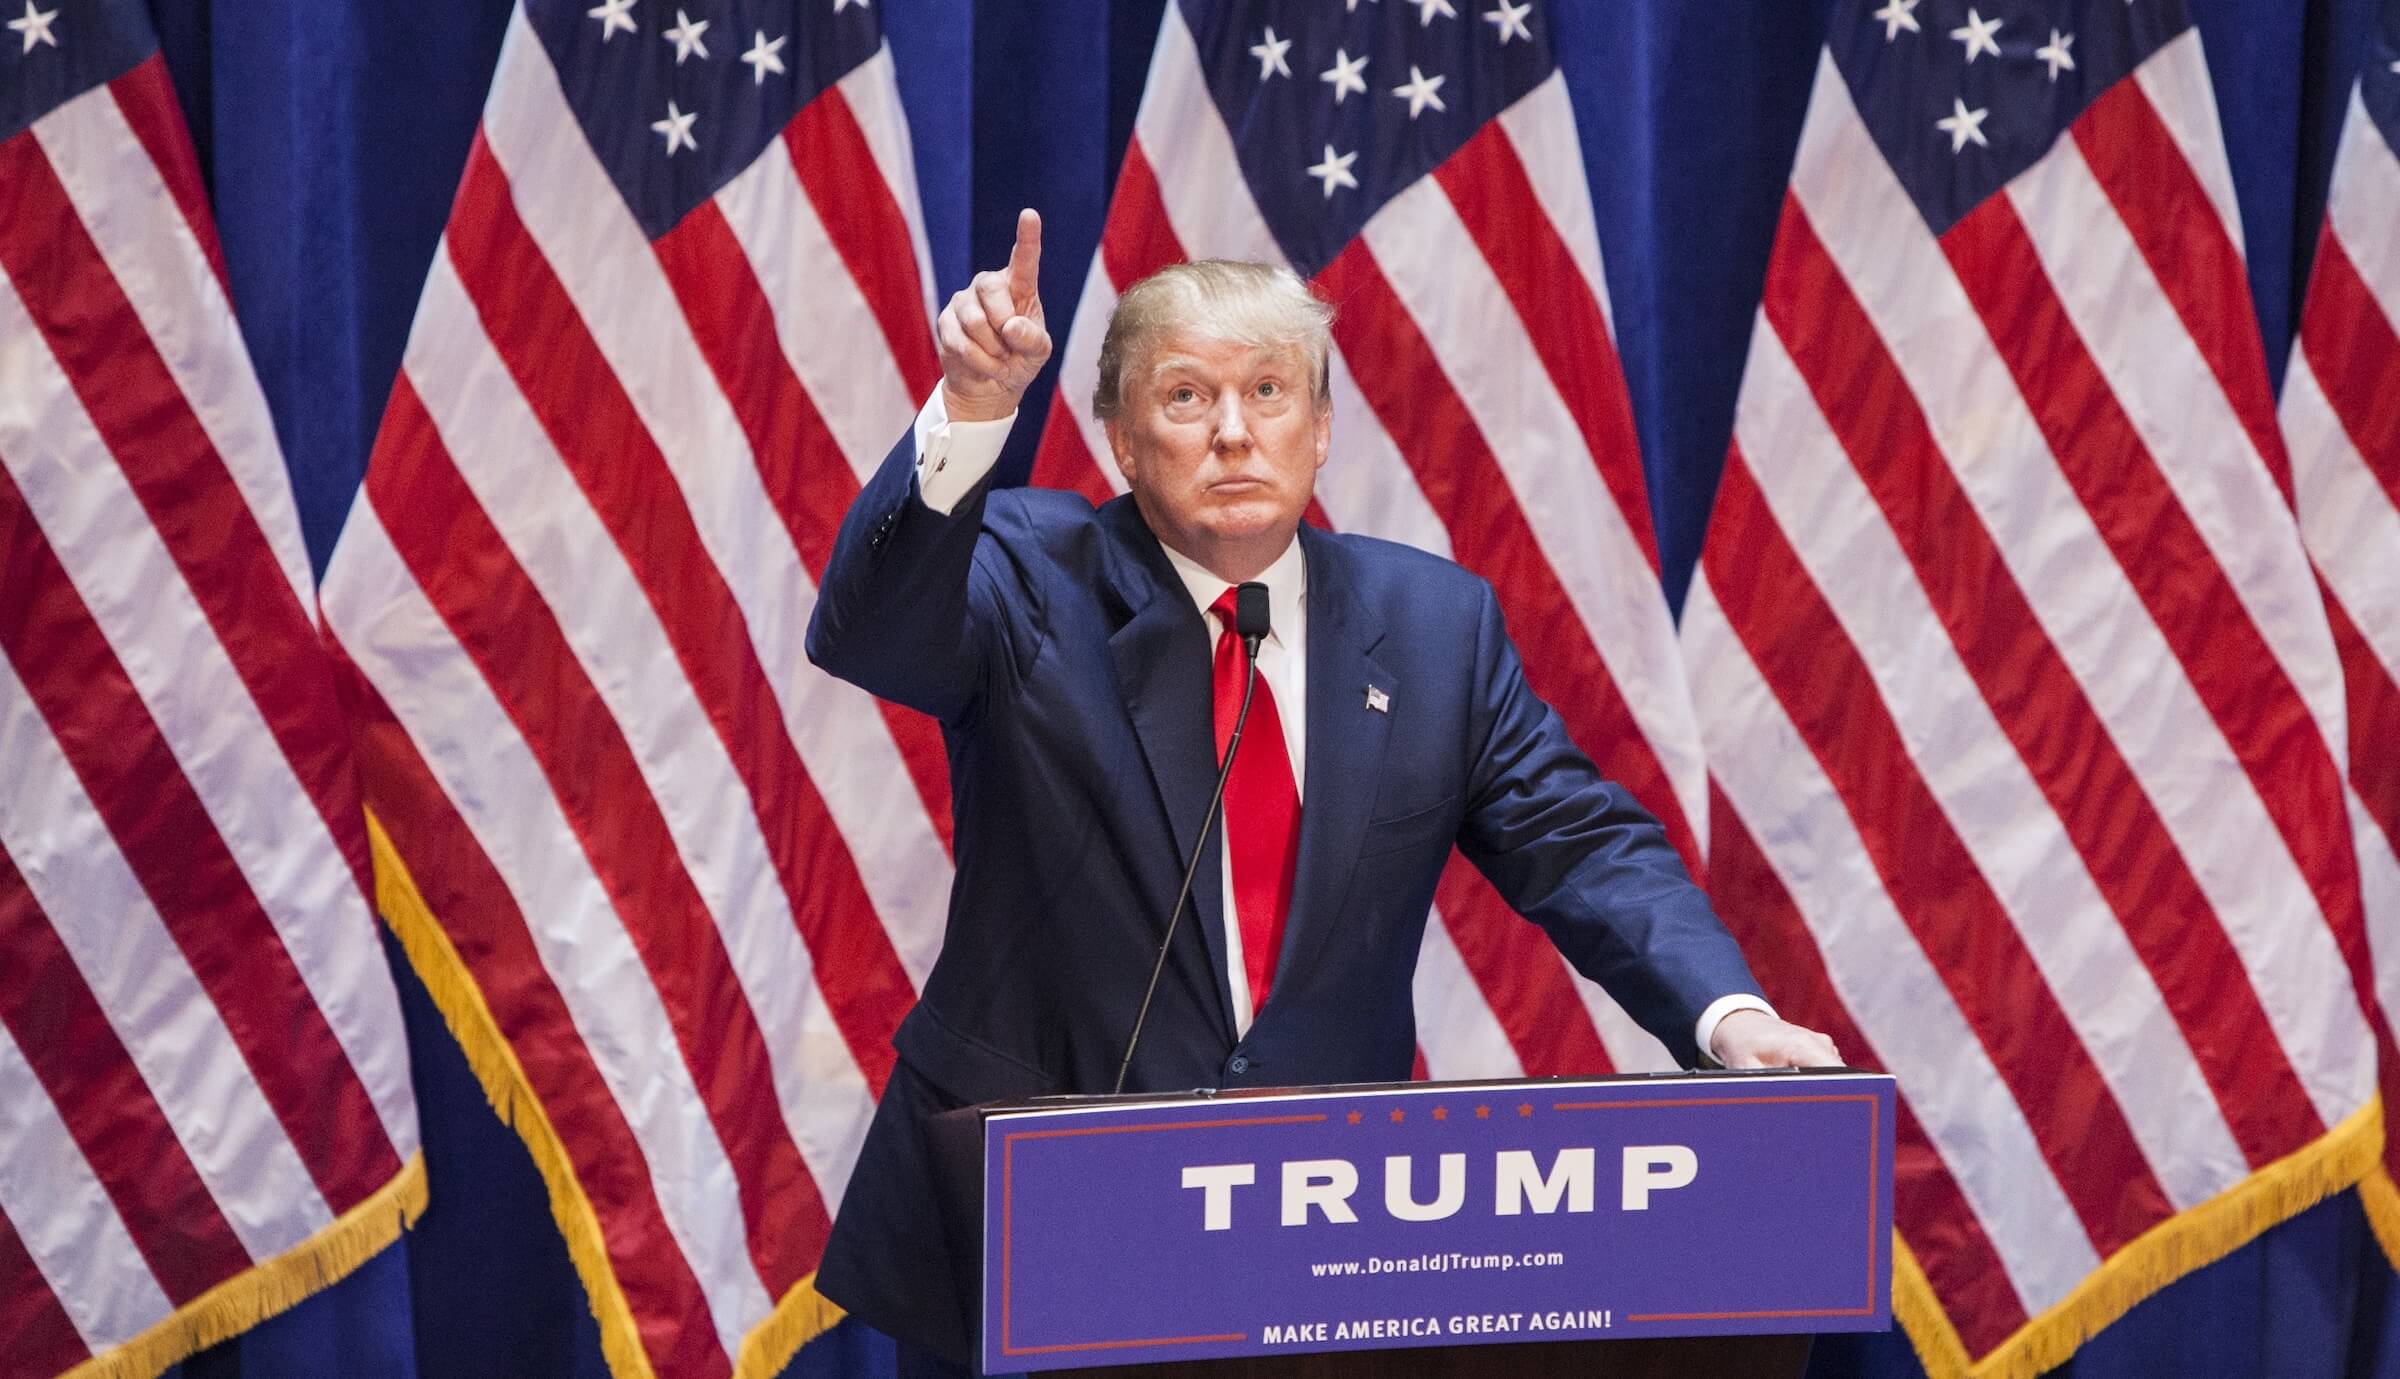 Donald Trump in a blue suit with a red tie pointing as he stands in front of three American flags.